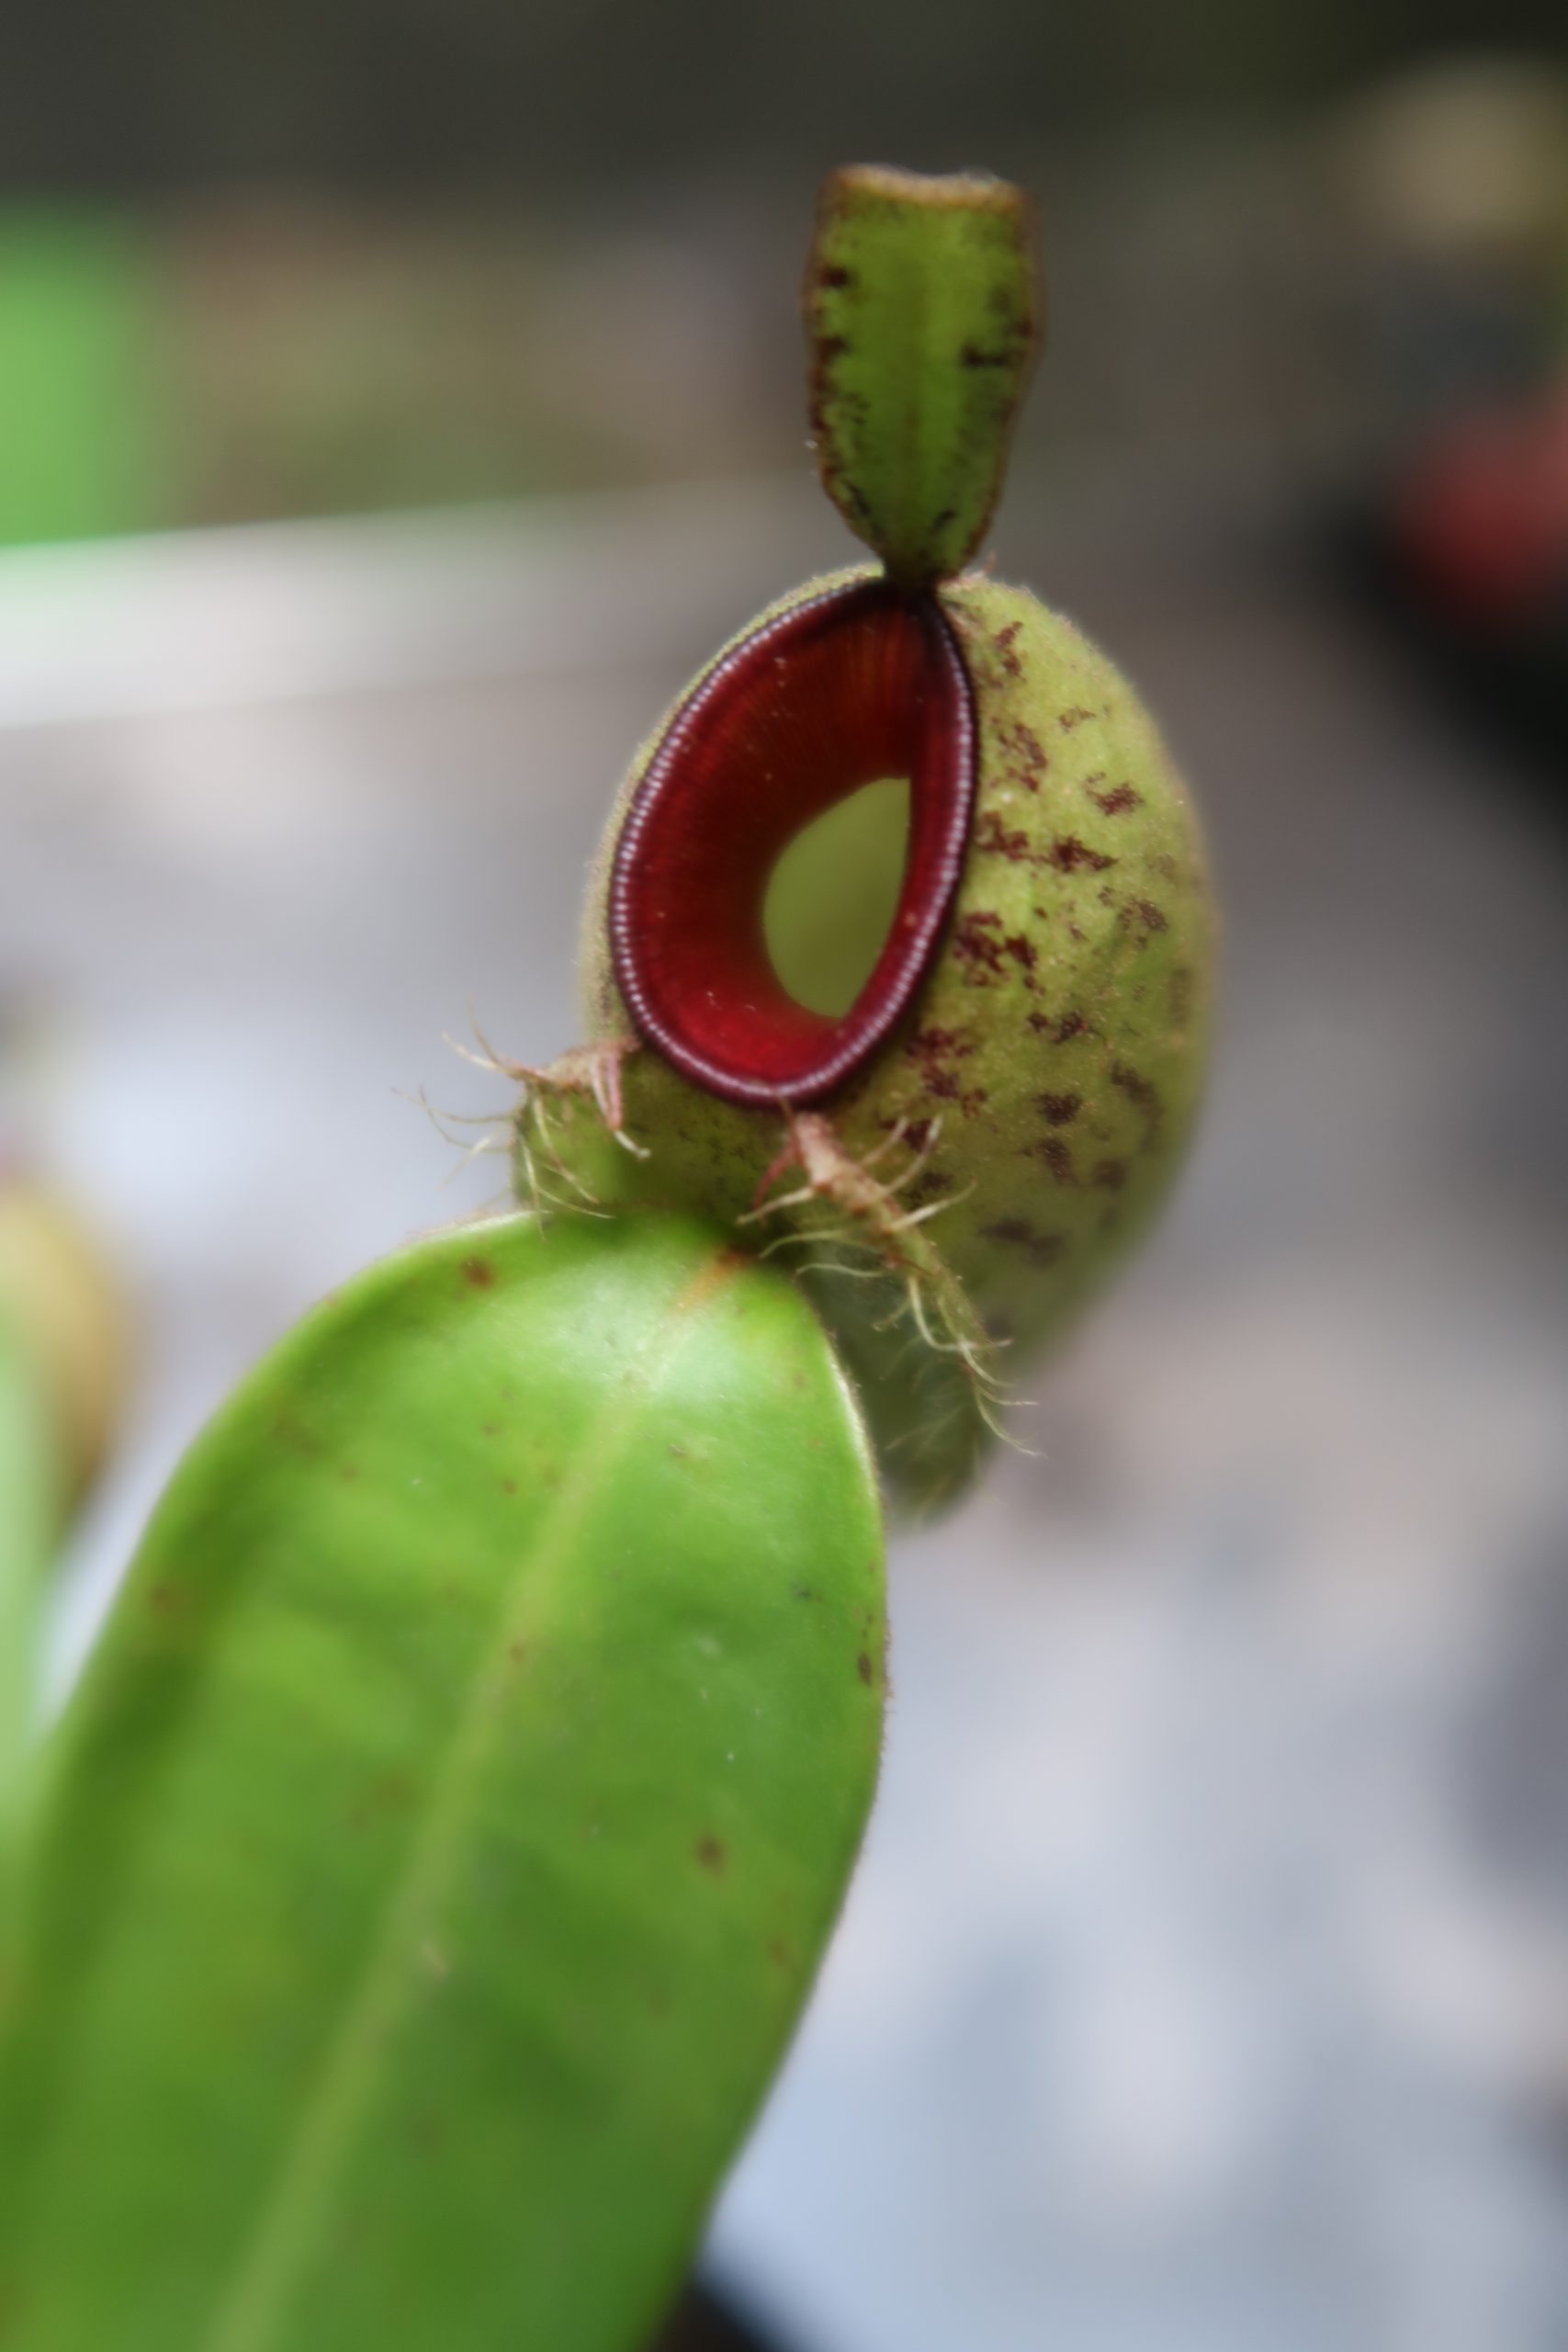 Nepenthes spotted ampullaria, with red lip